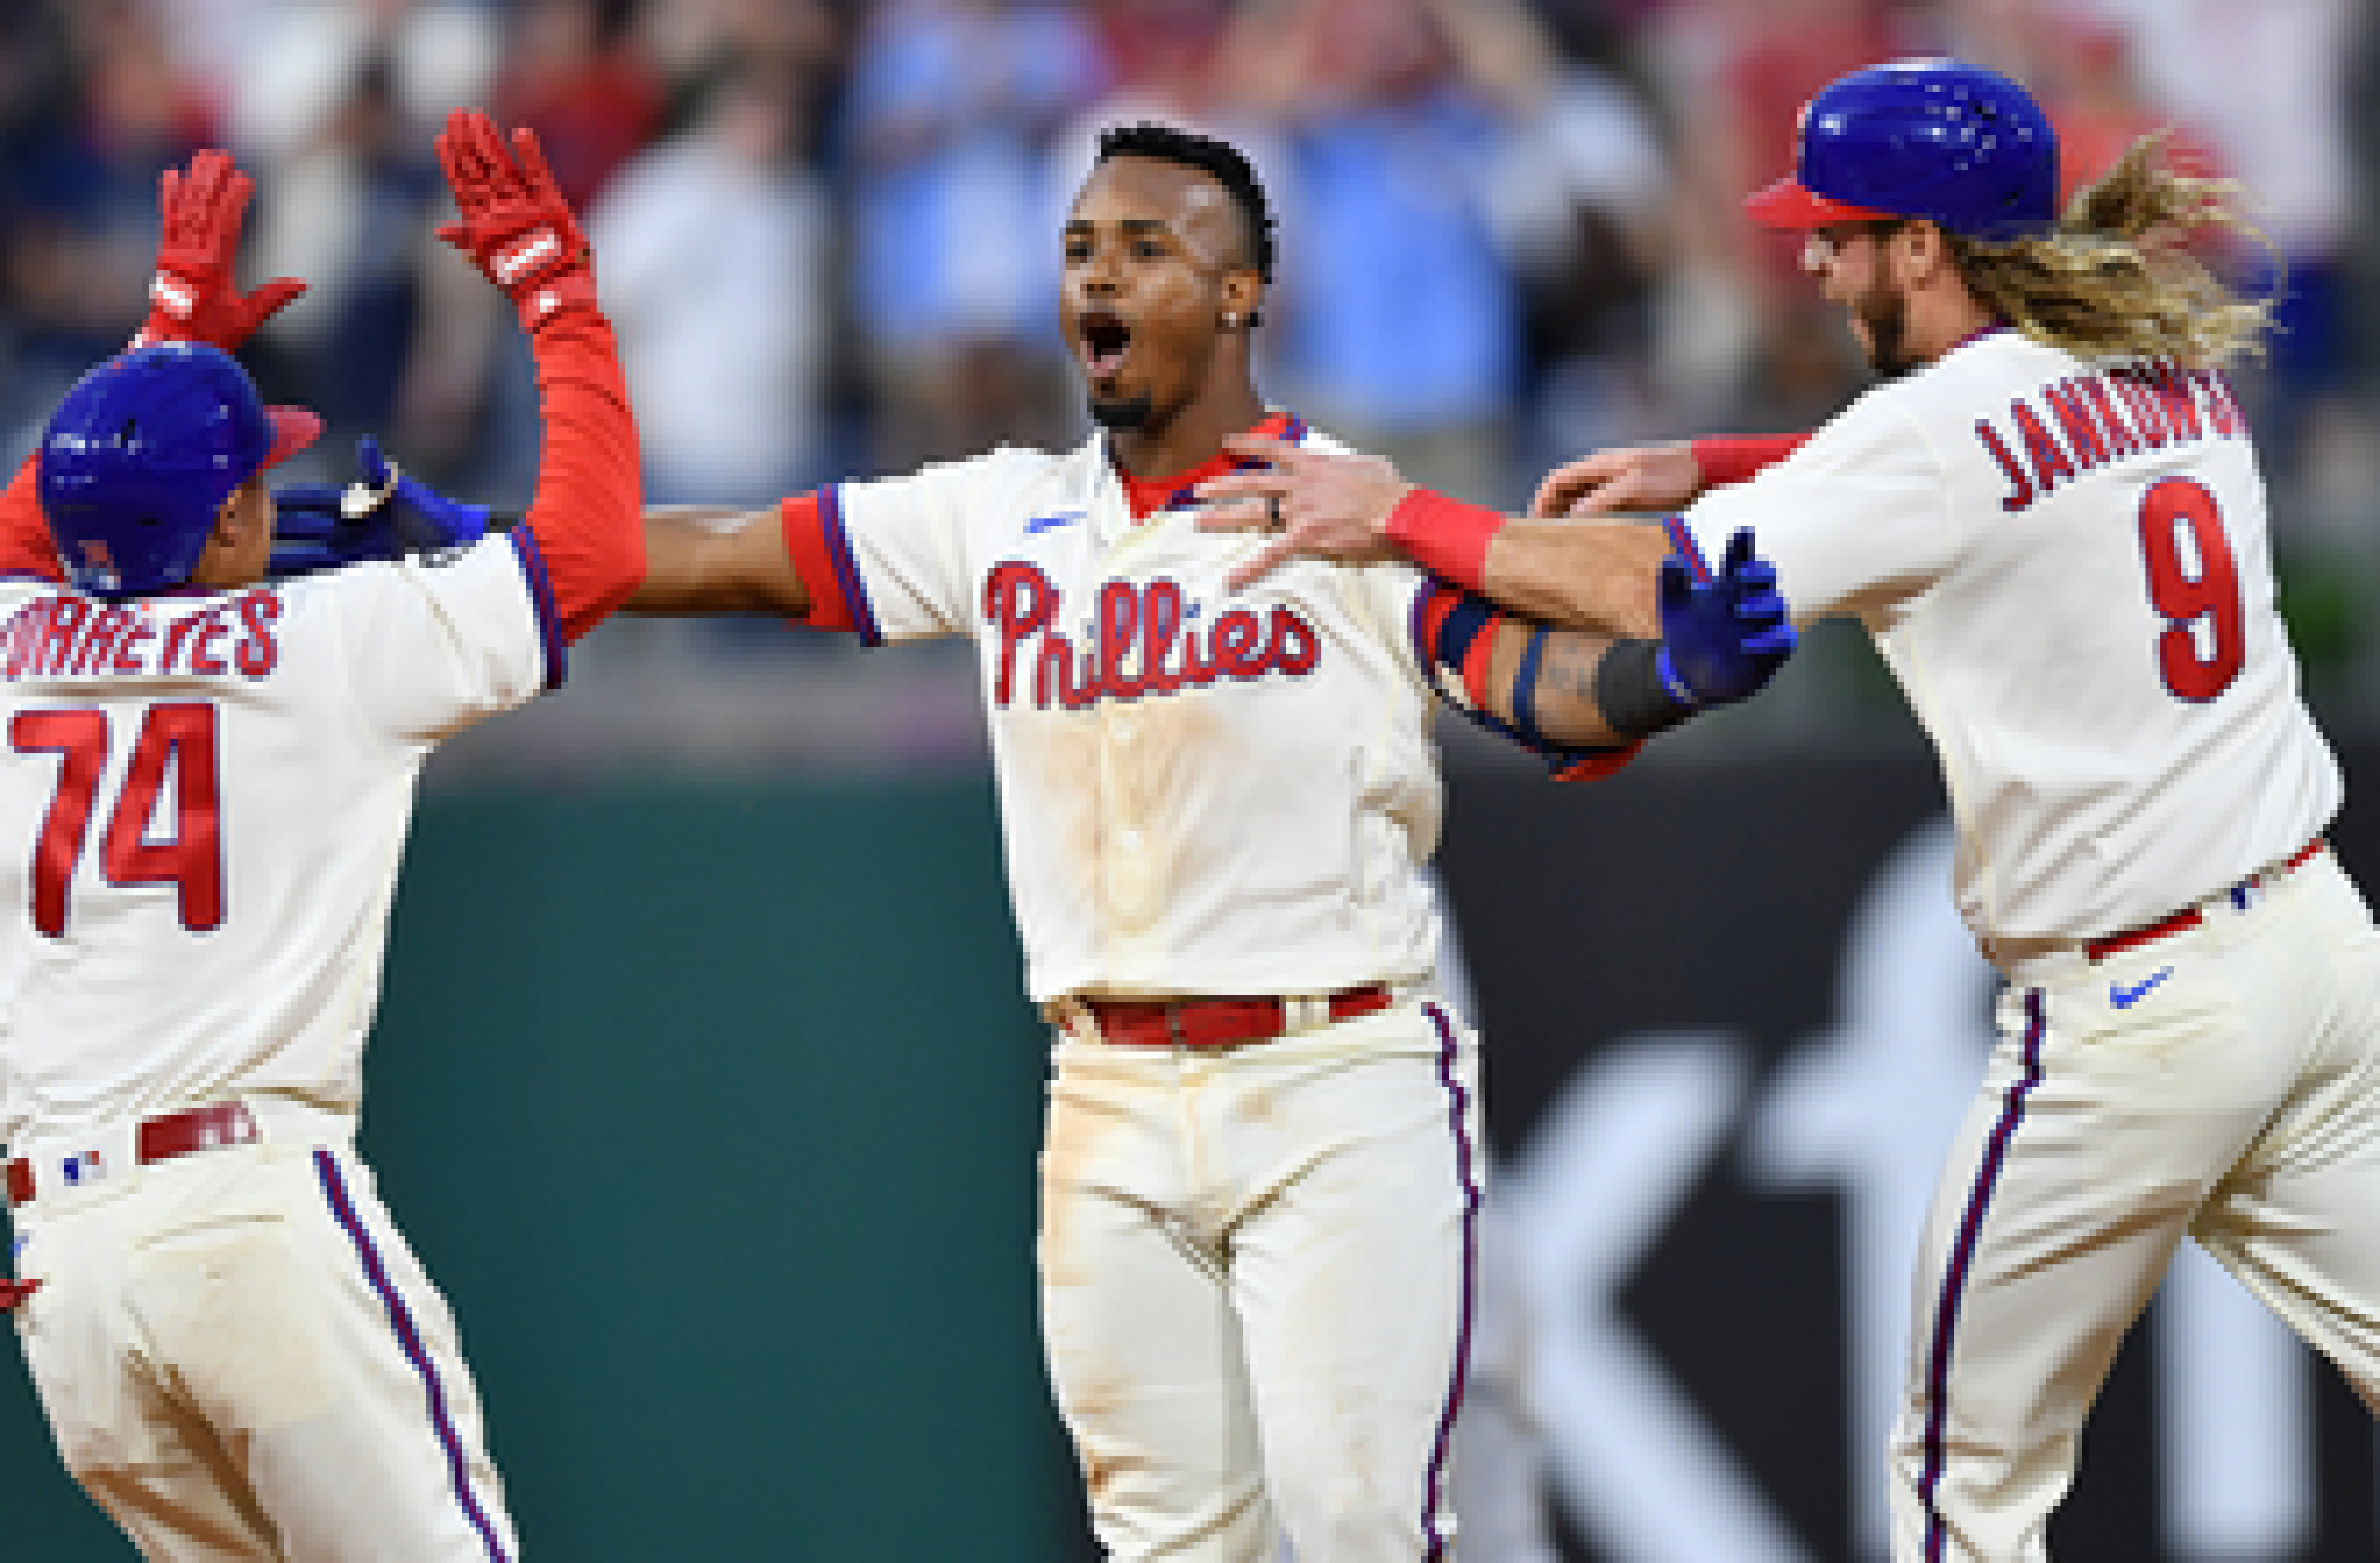 Yankees’ comeback falls short as Phillies get walk-off, 8-7 win in extras